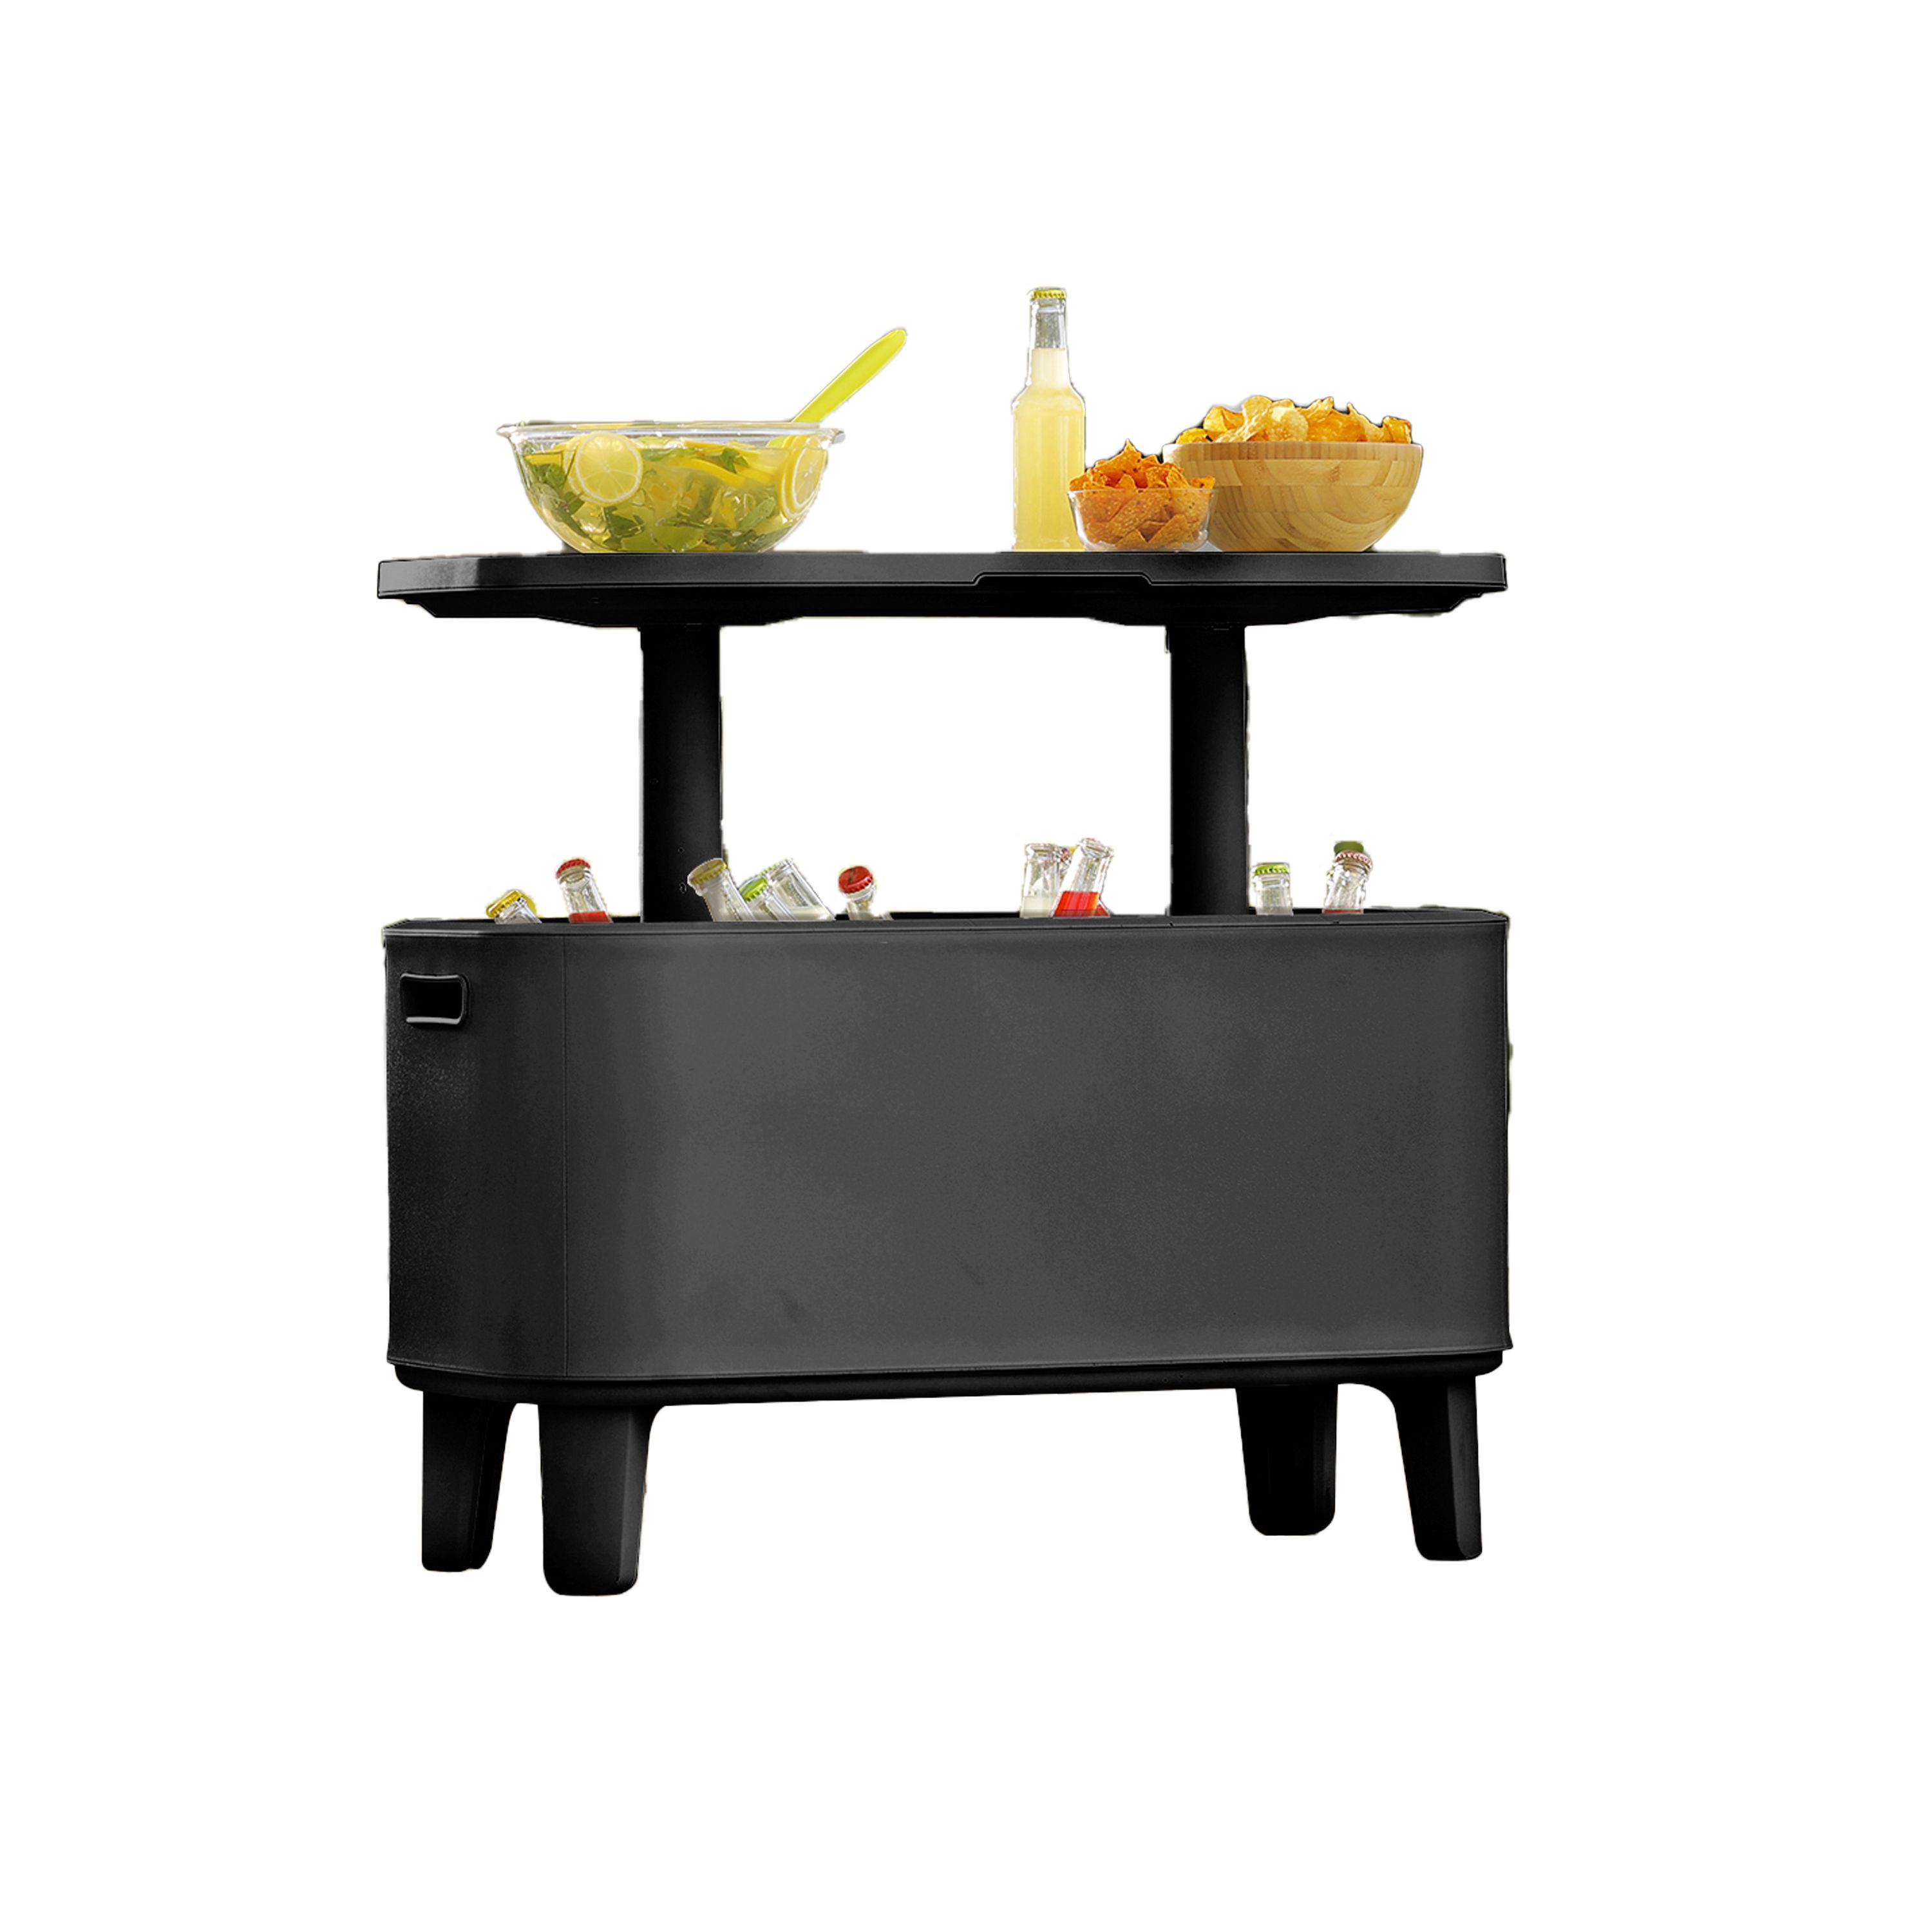 Keter Graphite Grey Plastic Lift-Up Table With Breeze Bar